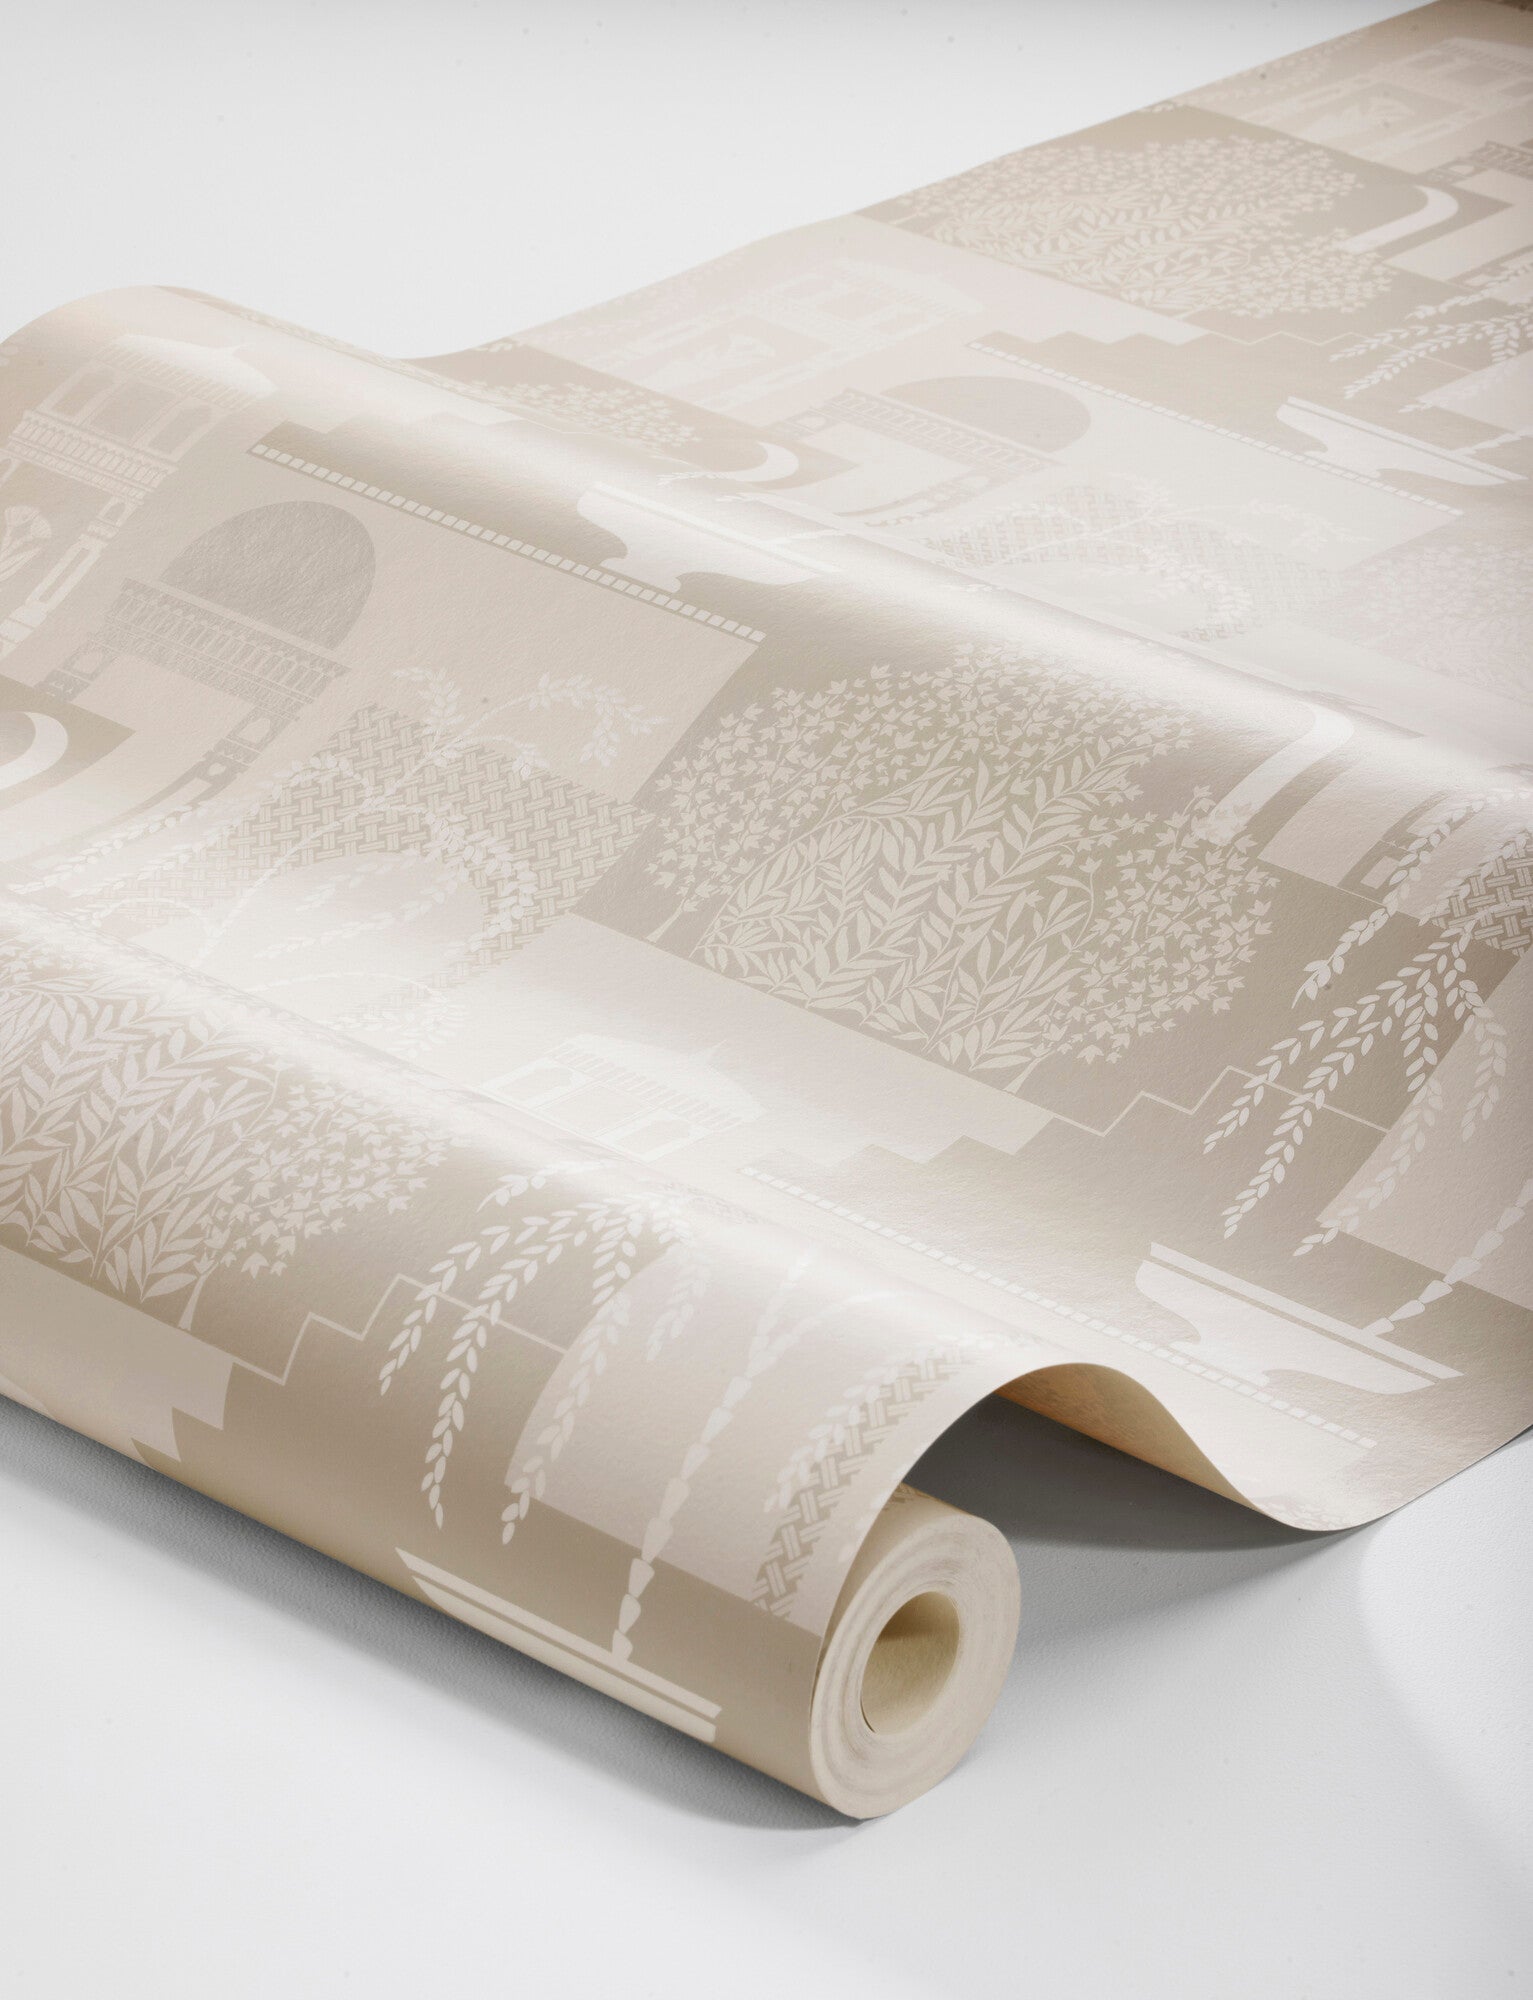 Experience the timeless charm of our Mimi wallpaper in neutral tones of muted beige and gray.